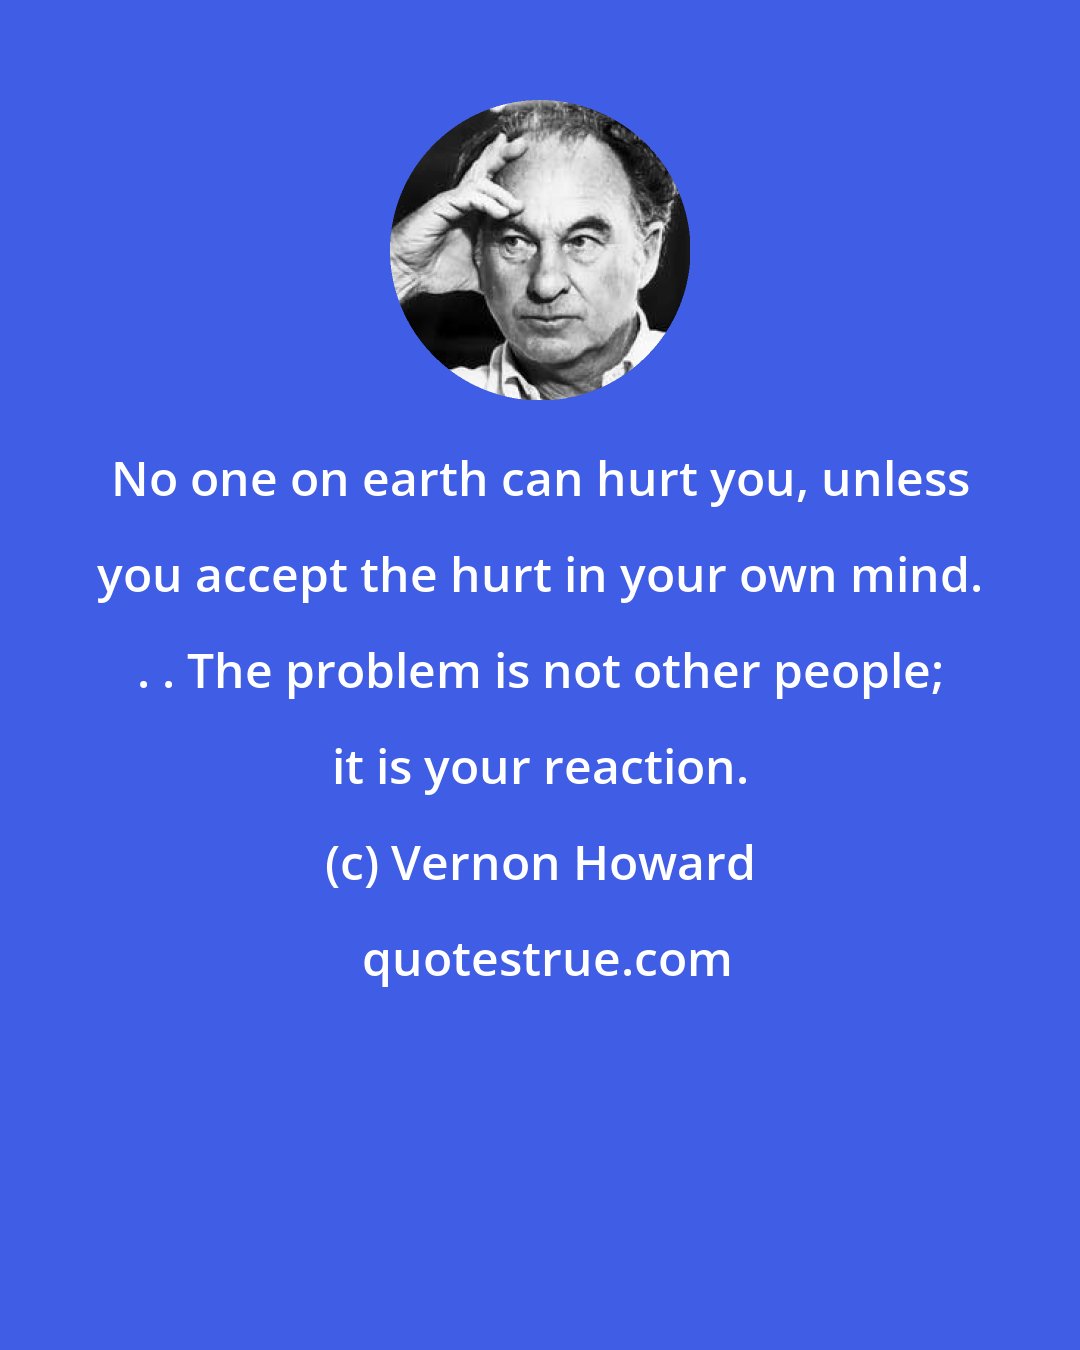 Vernon Howard: No one on earth can hurt you, unless you accept the hurt in your own mind. . . The problem is not other people; it is your reaction.